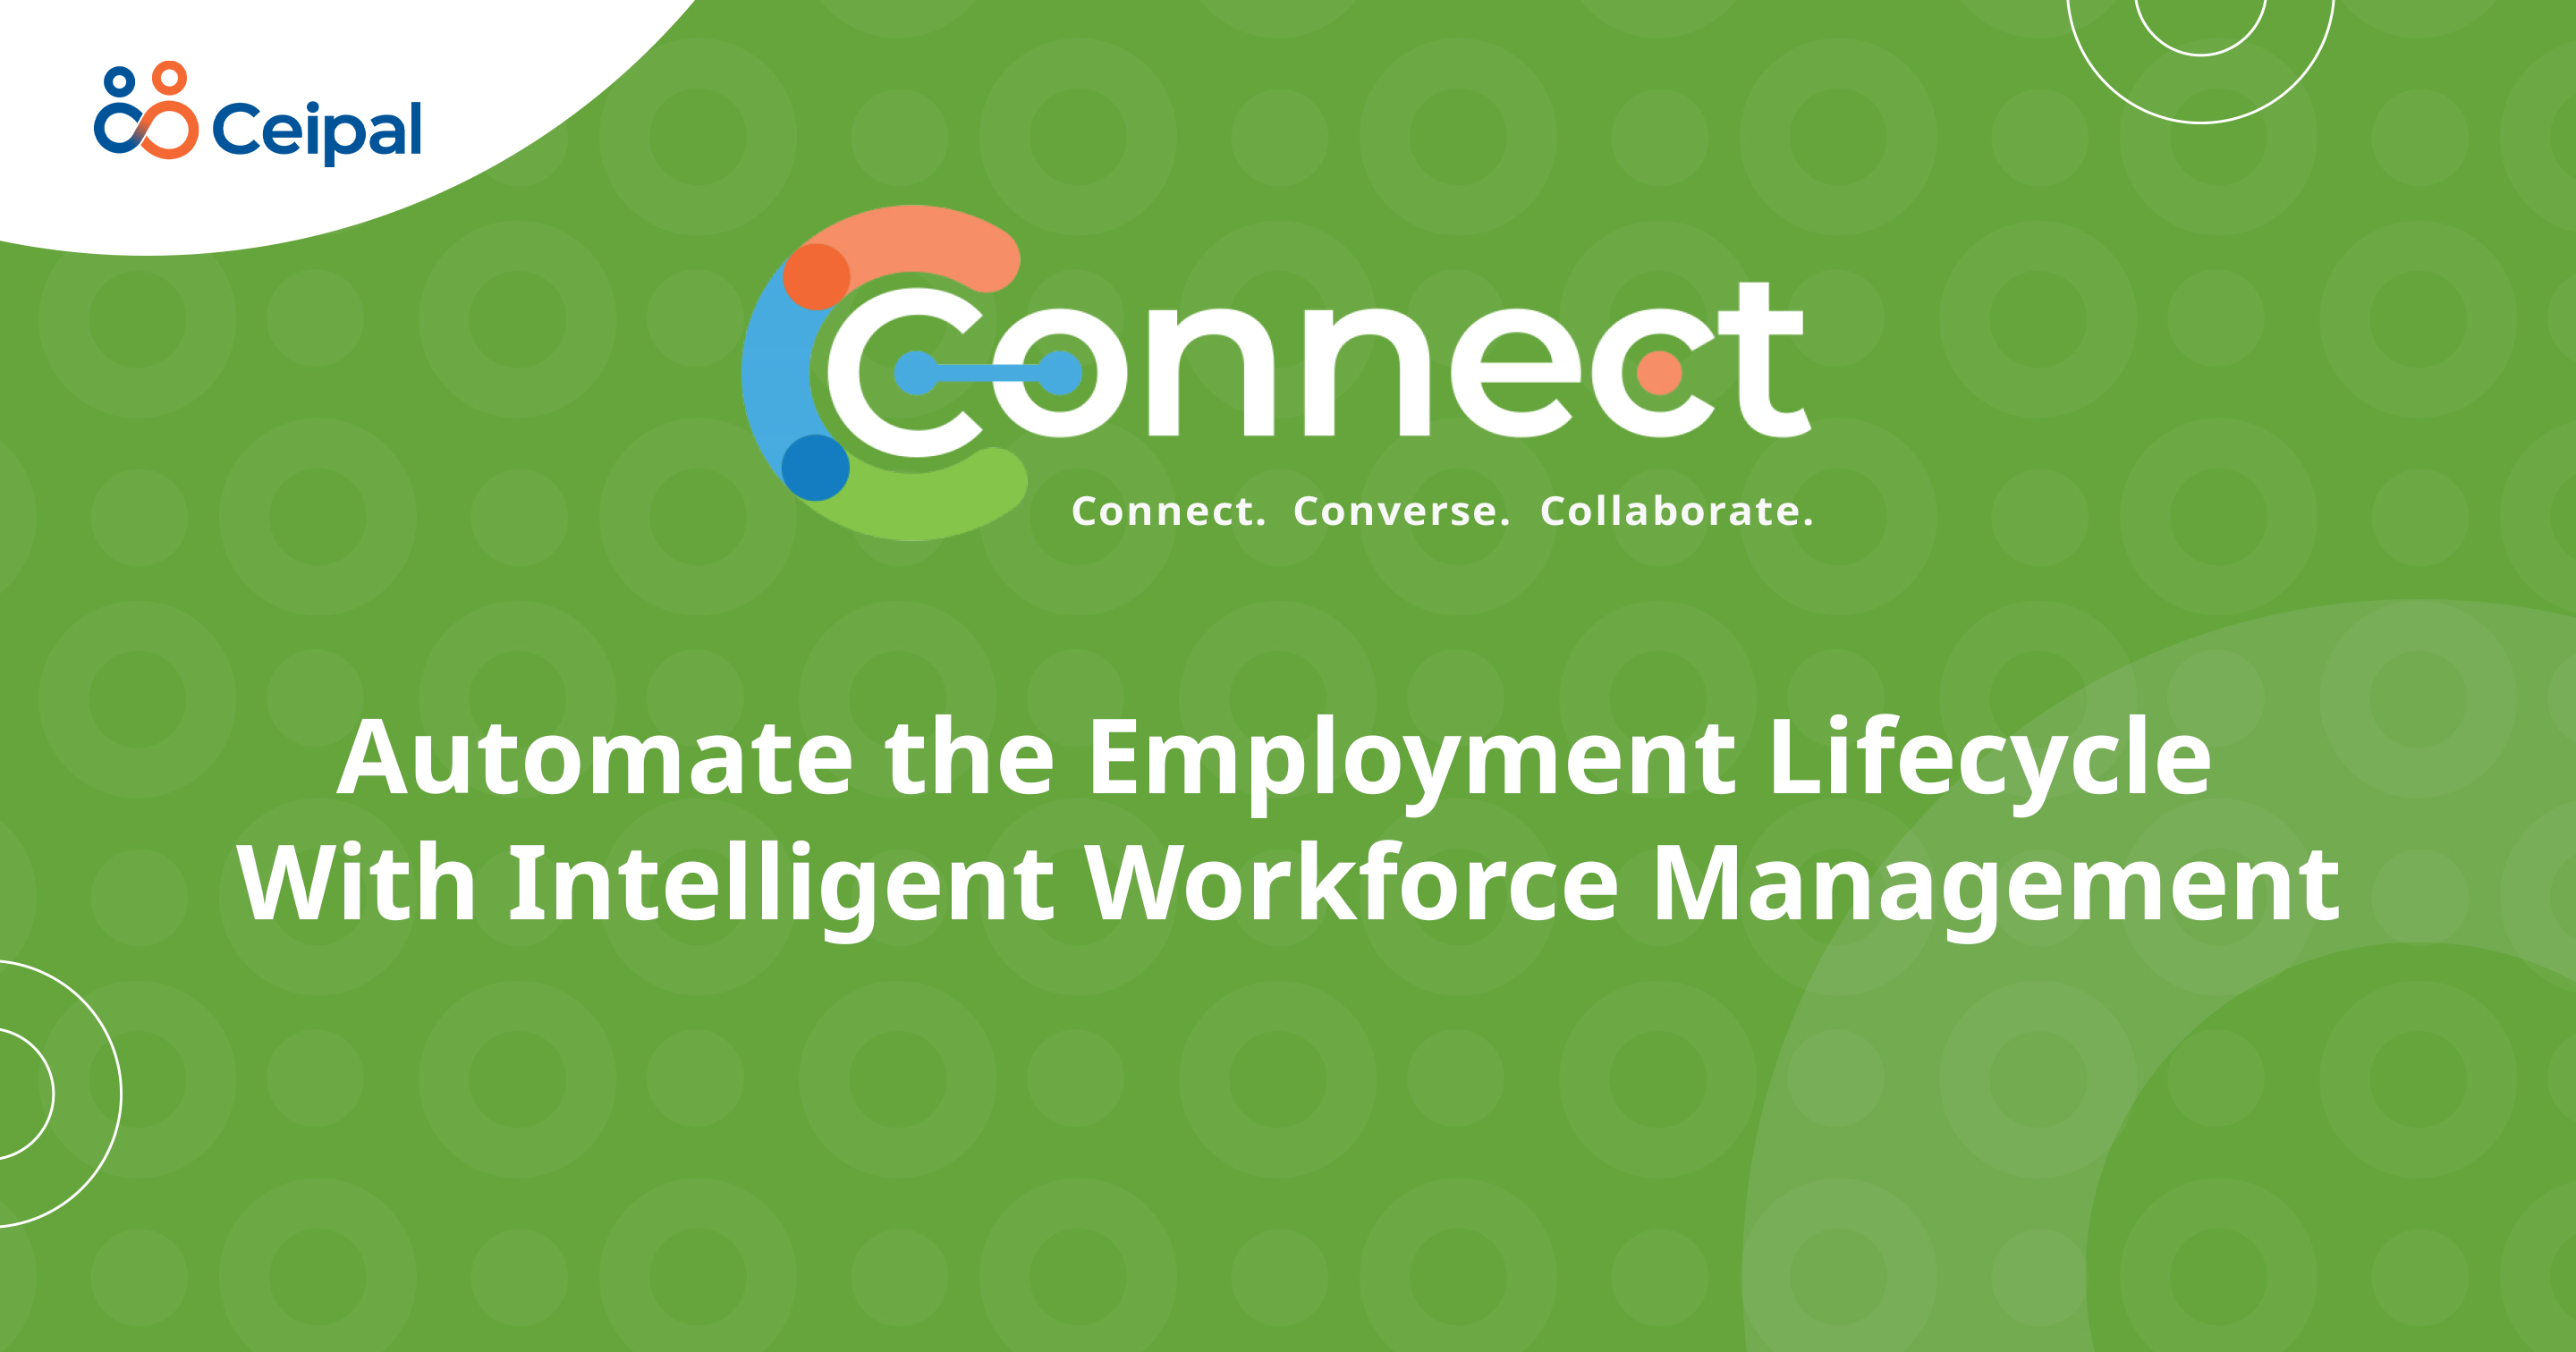 Automate the Employment Lifecycle With Intelligent Workforce Management